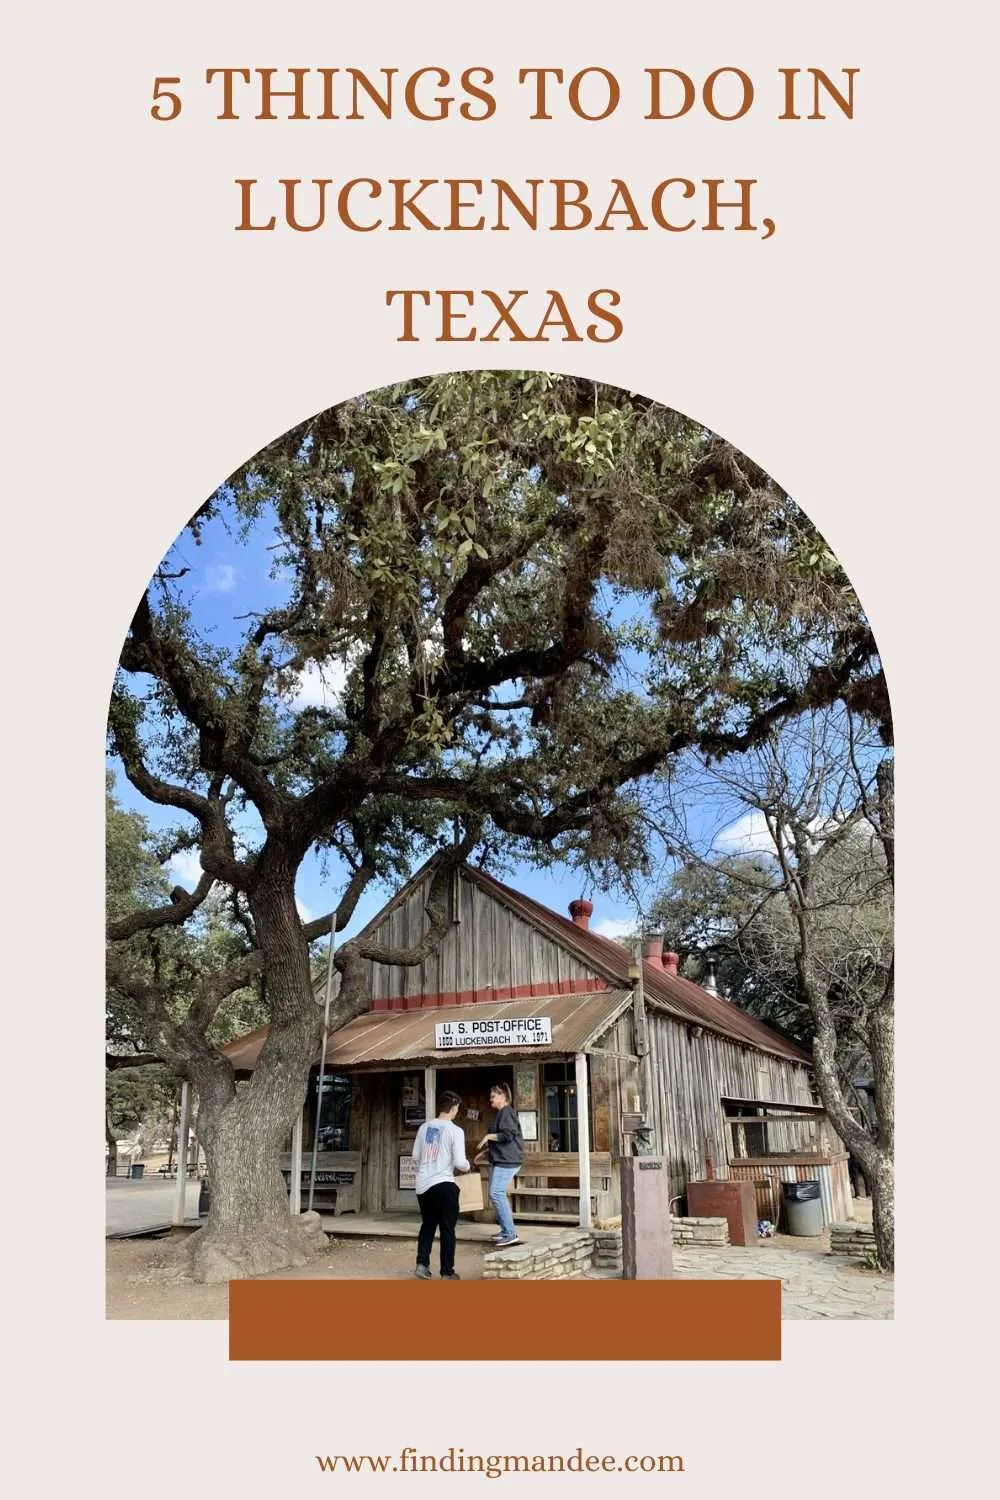 5 Things To Do in Luckenbach, Texas